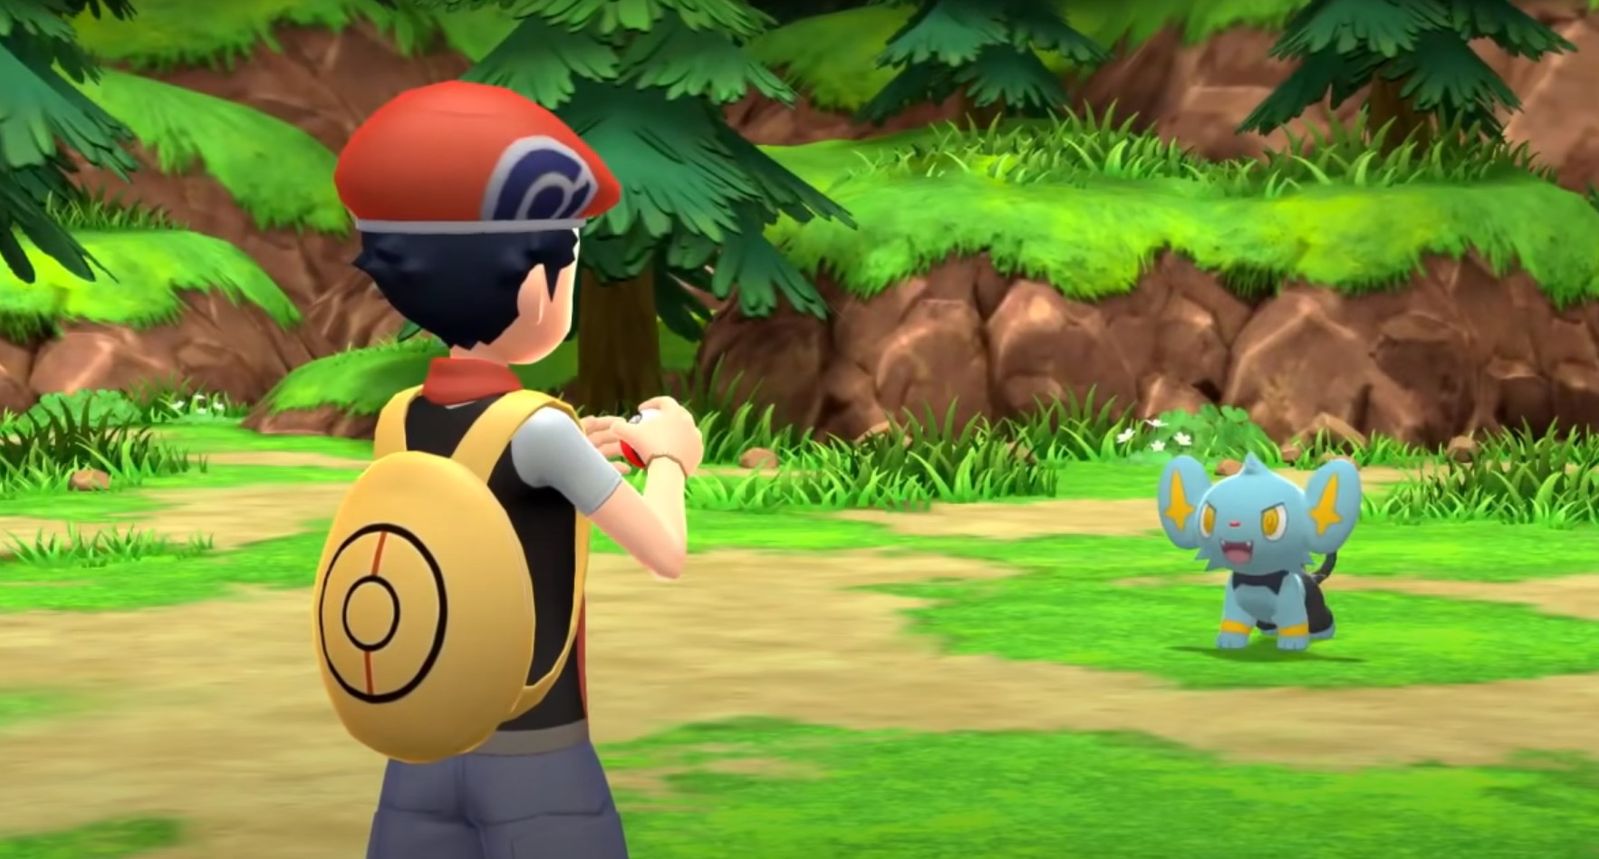 A Pokémon Trainer is about to battle with a Shinx in Pokémon Brilliant Diamond and Shining Pearl.